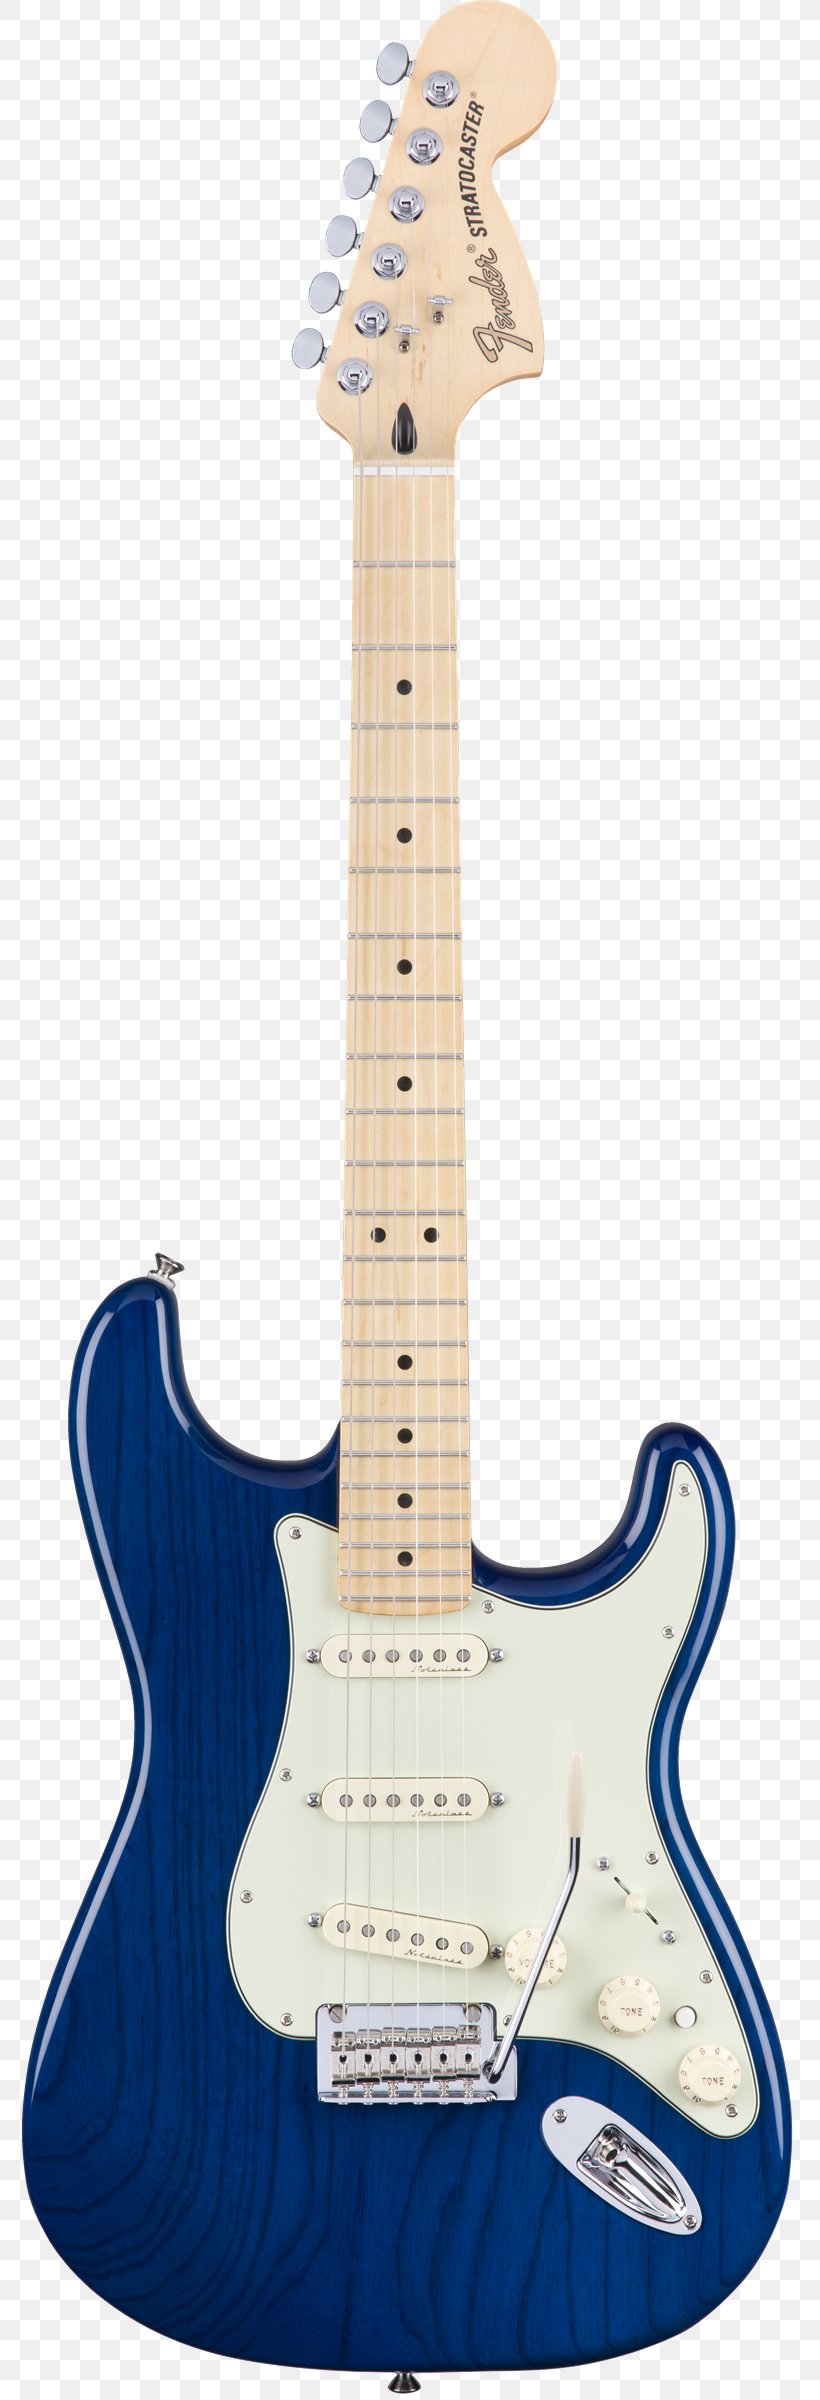 Fender Stratocaster Fender American Deluxe Series Fender Musical Instruments Corporation Electric Guitar, PNG, 777x2400px, Fender Stratocaster, Acoustic Electric Guitar, Bass Guitar, Electric Guitar, Electronic Musical Instrument Download Free